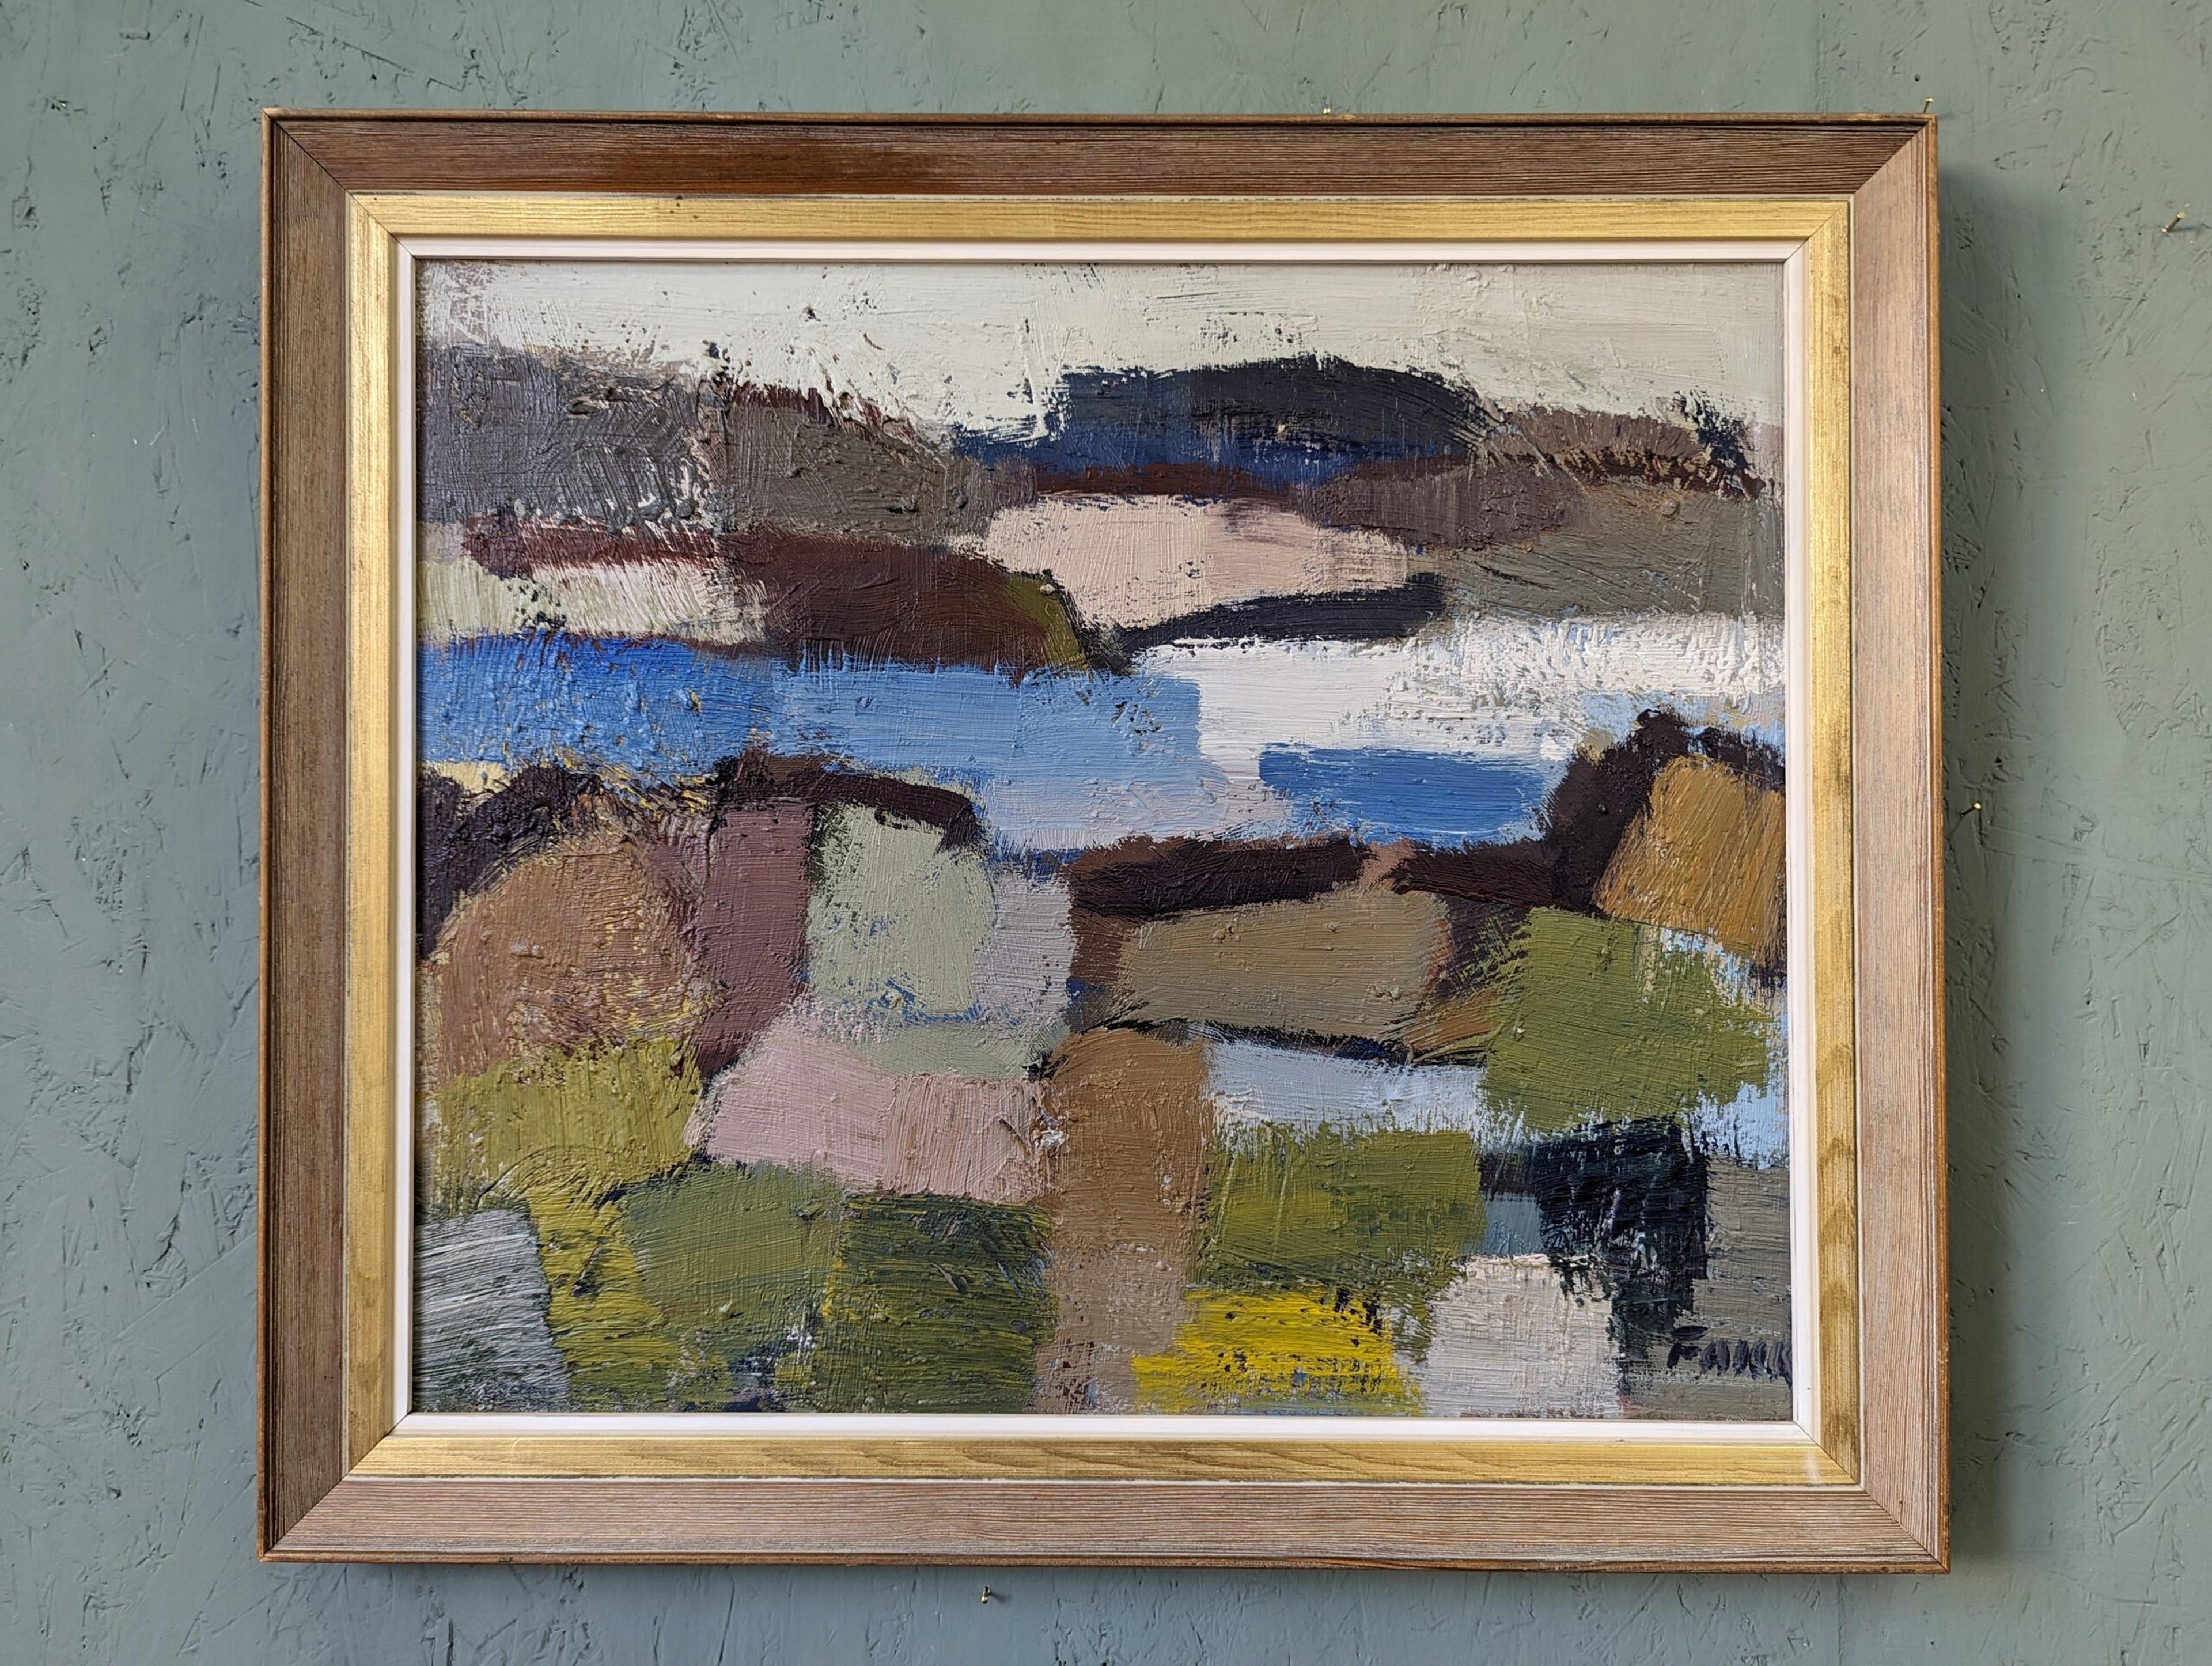 ABSTRACT COAST TRAIL
Size:  56 x 65 cm (including frame)
Oil on Canvas

A striking and very confidently executed mid-century abstract coastal landscape composition in oil, painted onto canvas.

The painting presents a scenic and vibrant hiking trail